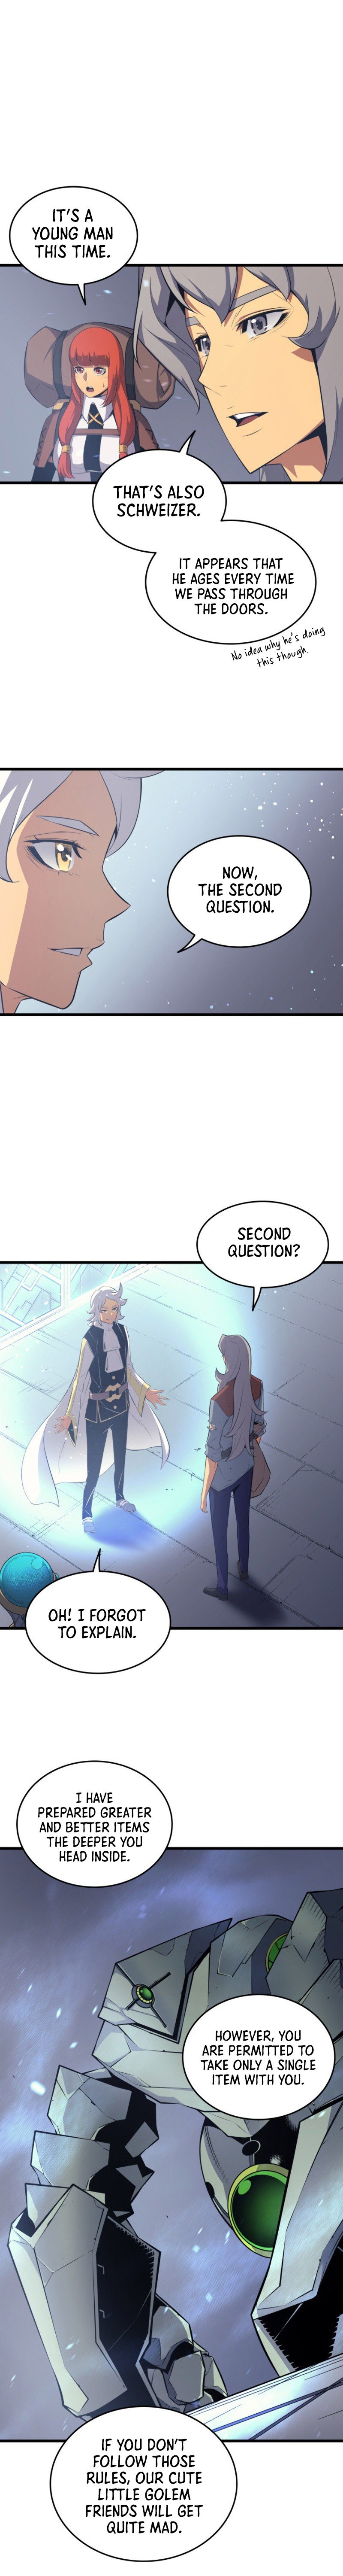 the-great-mage-that-returned-after-4000-years-chap-34-3